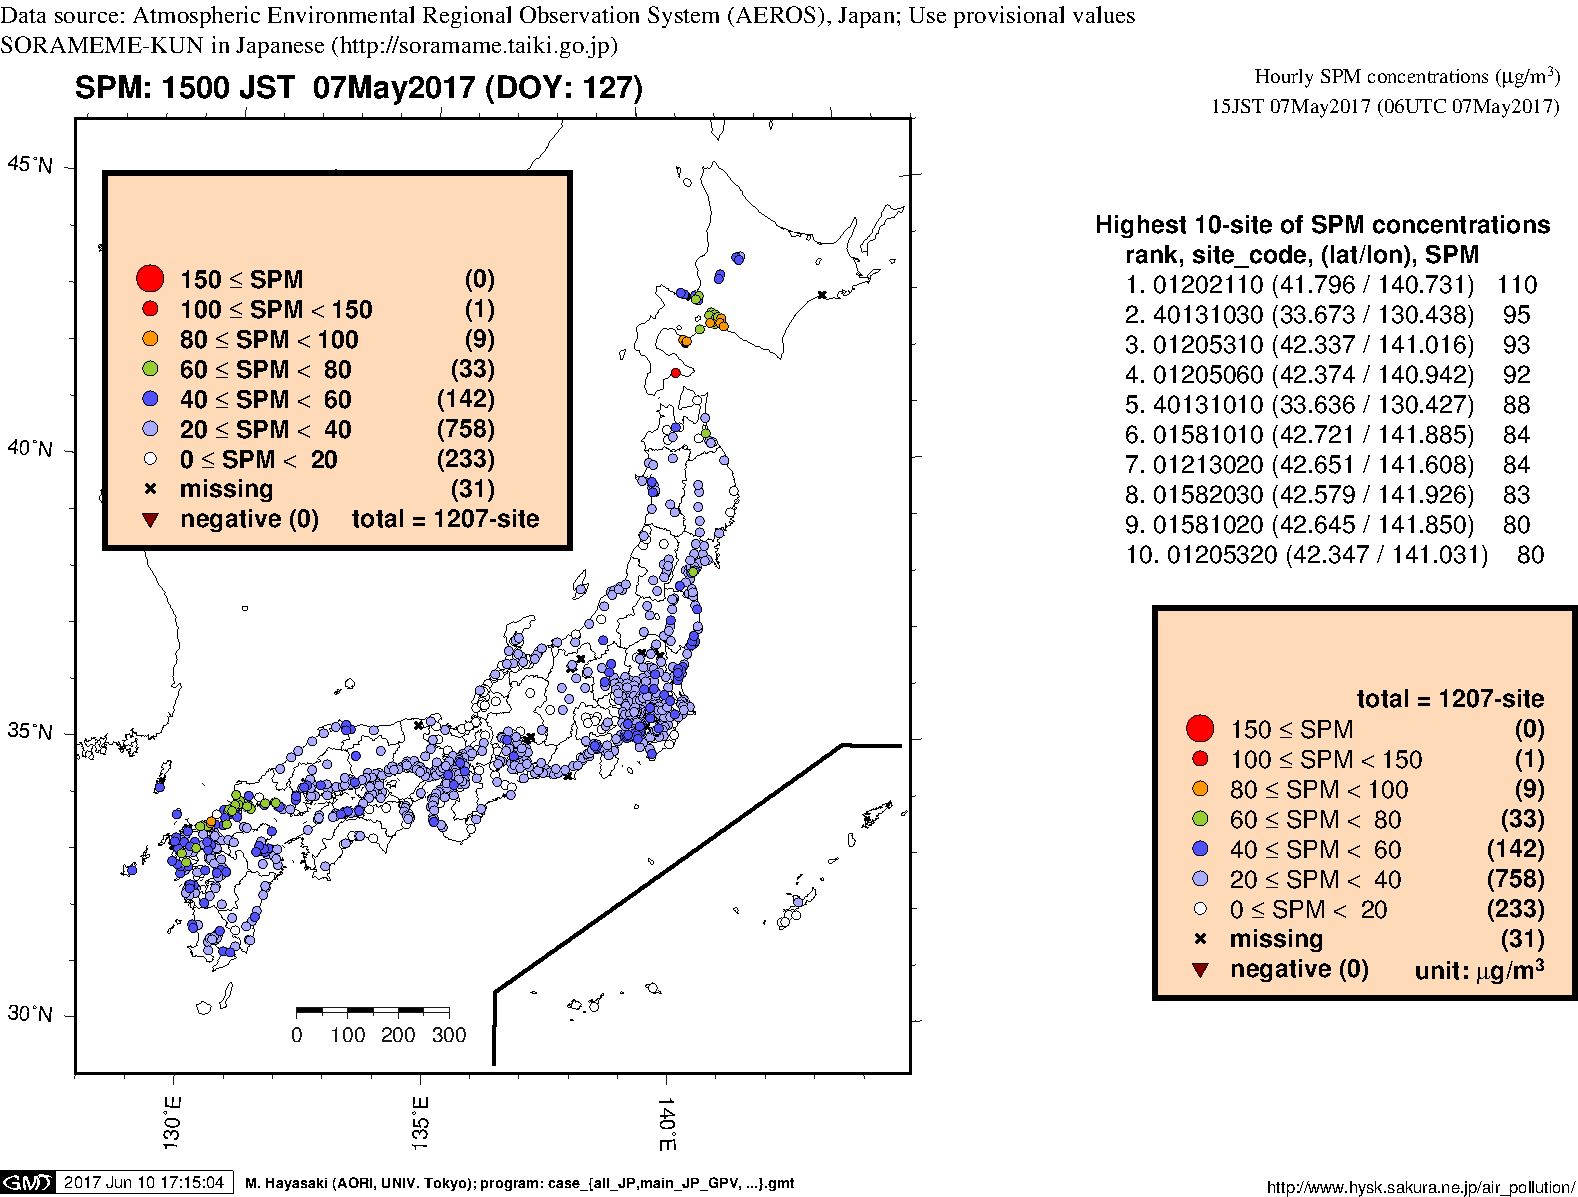 SPM concentration in mainland Japan (15JST 07May2017)